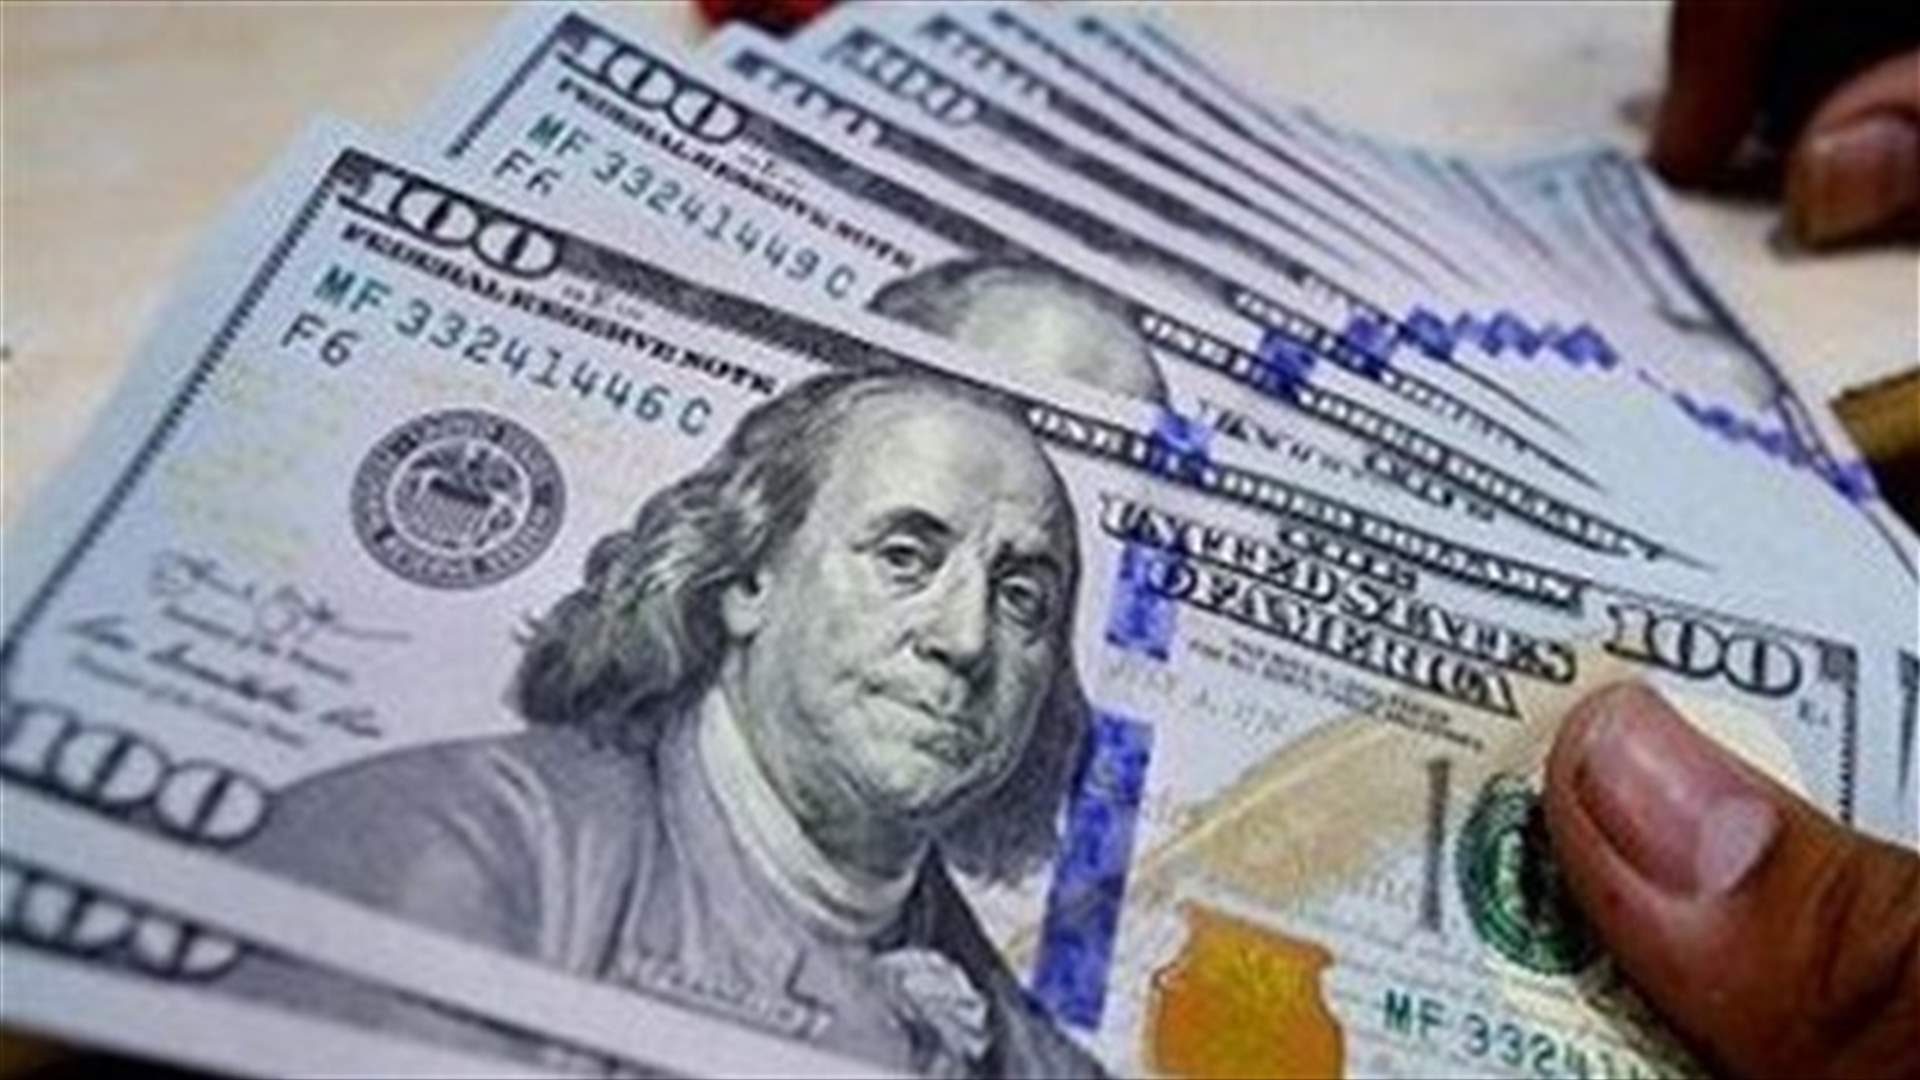 Syndicate of Money Changers fixes dollar rate at 2000 LBP